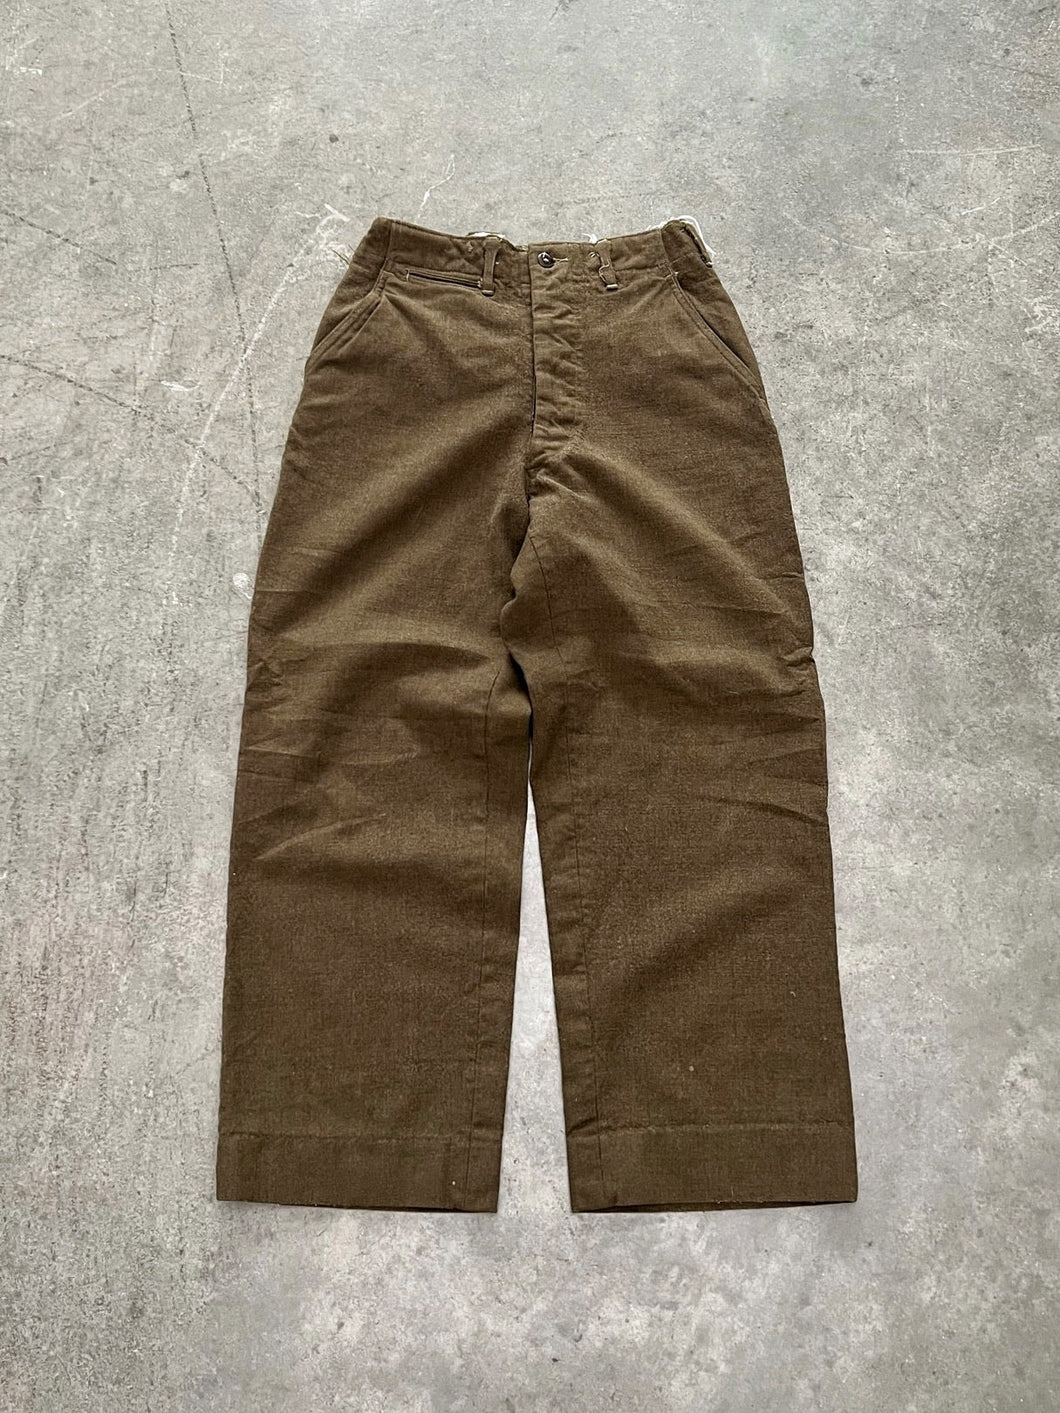 OLIVE GREEN WOOL MILITARY TROUSERS - 1970S